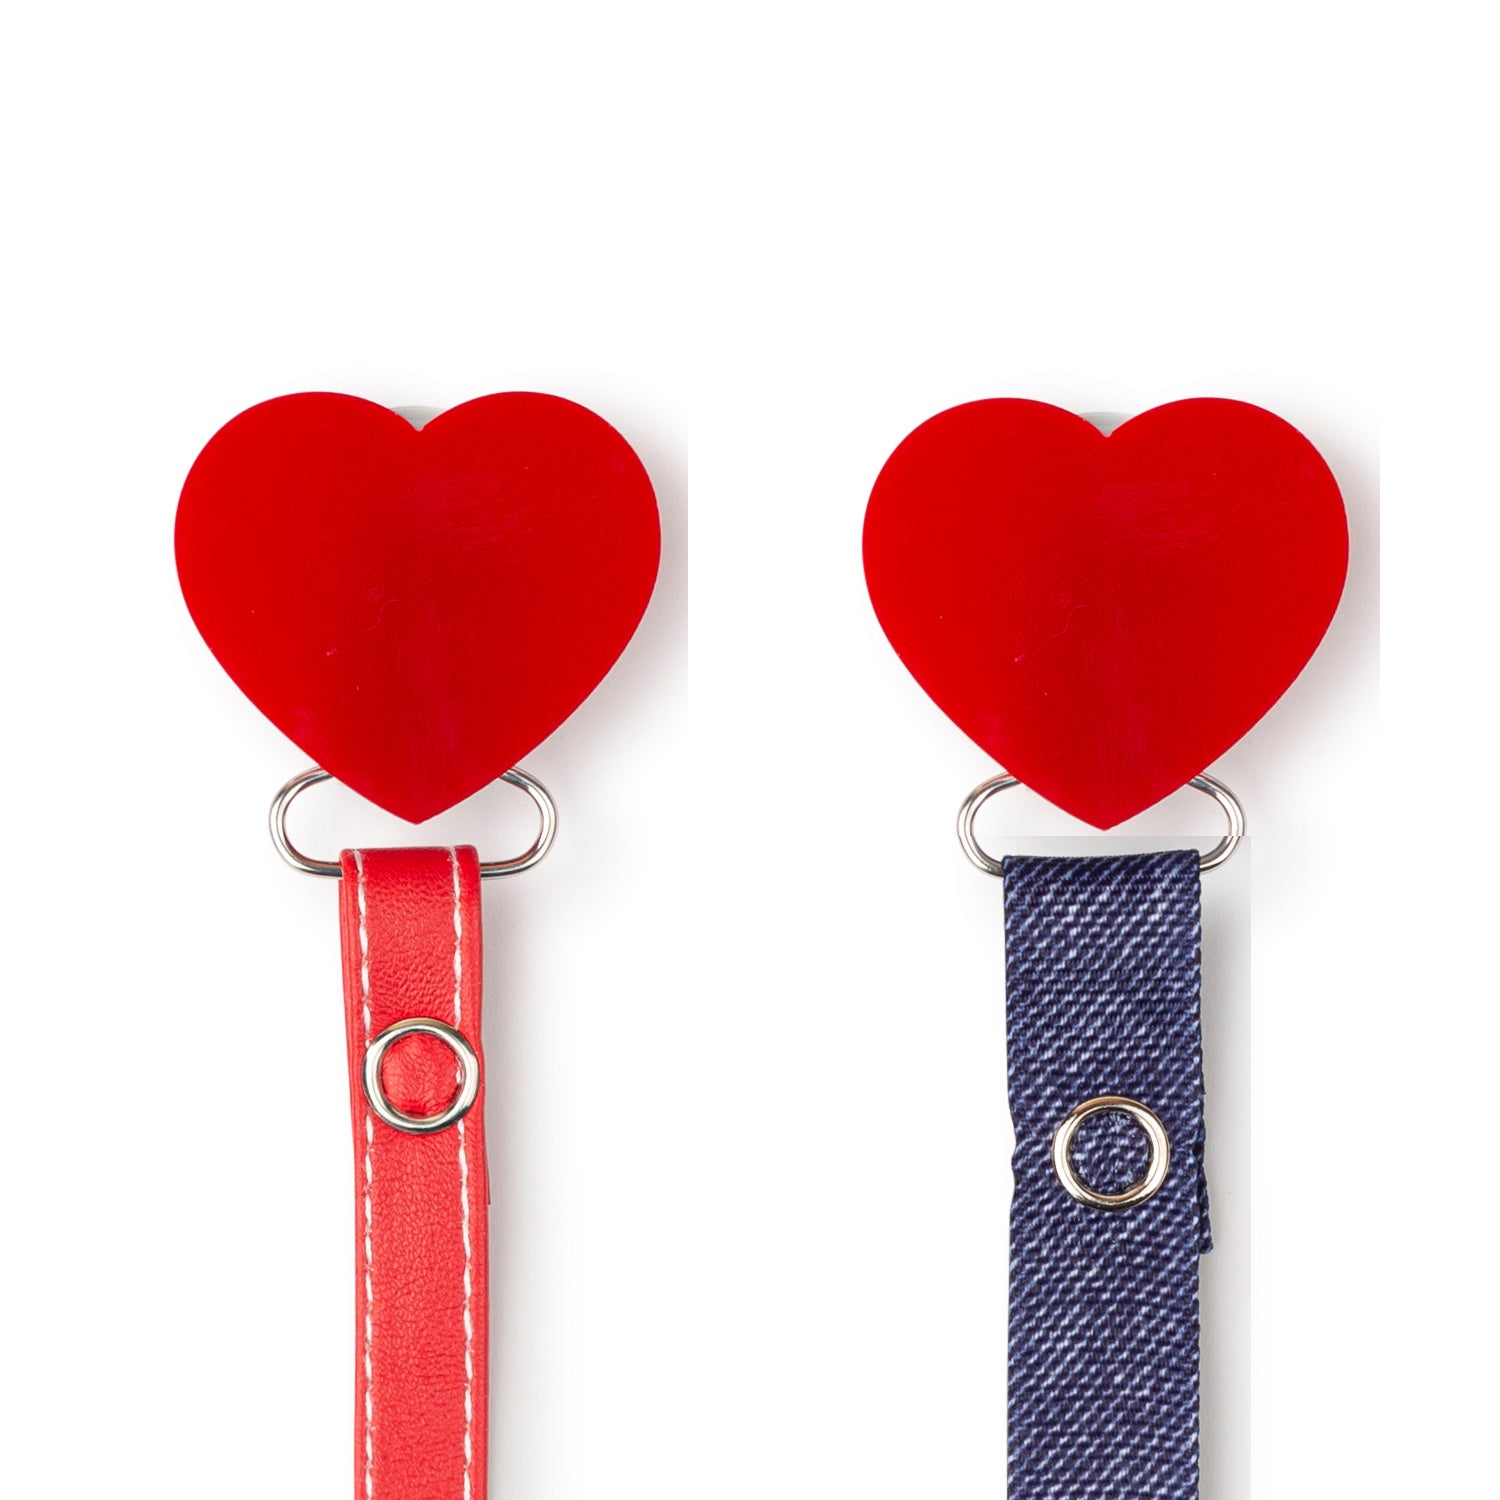 Red Heart Key Ring Pouch